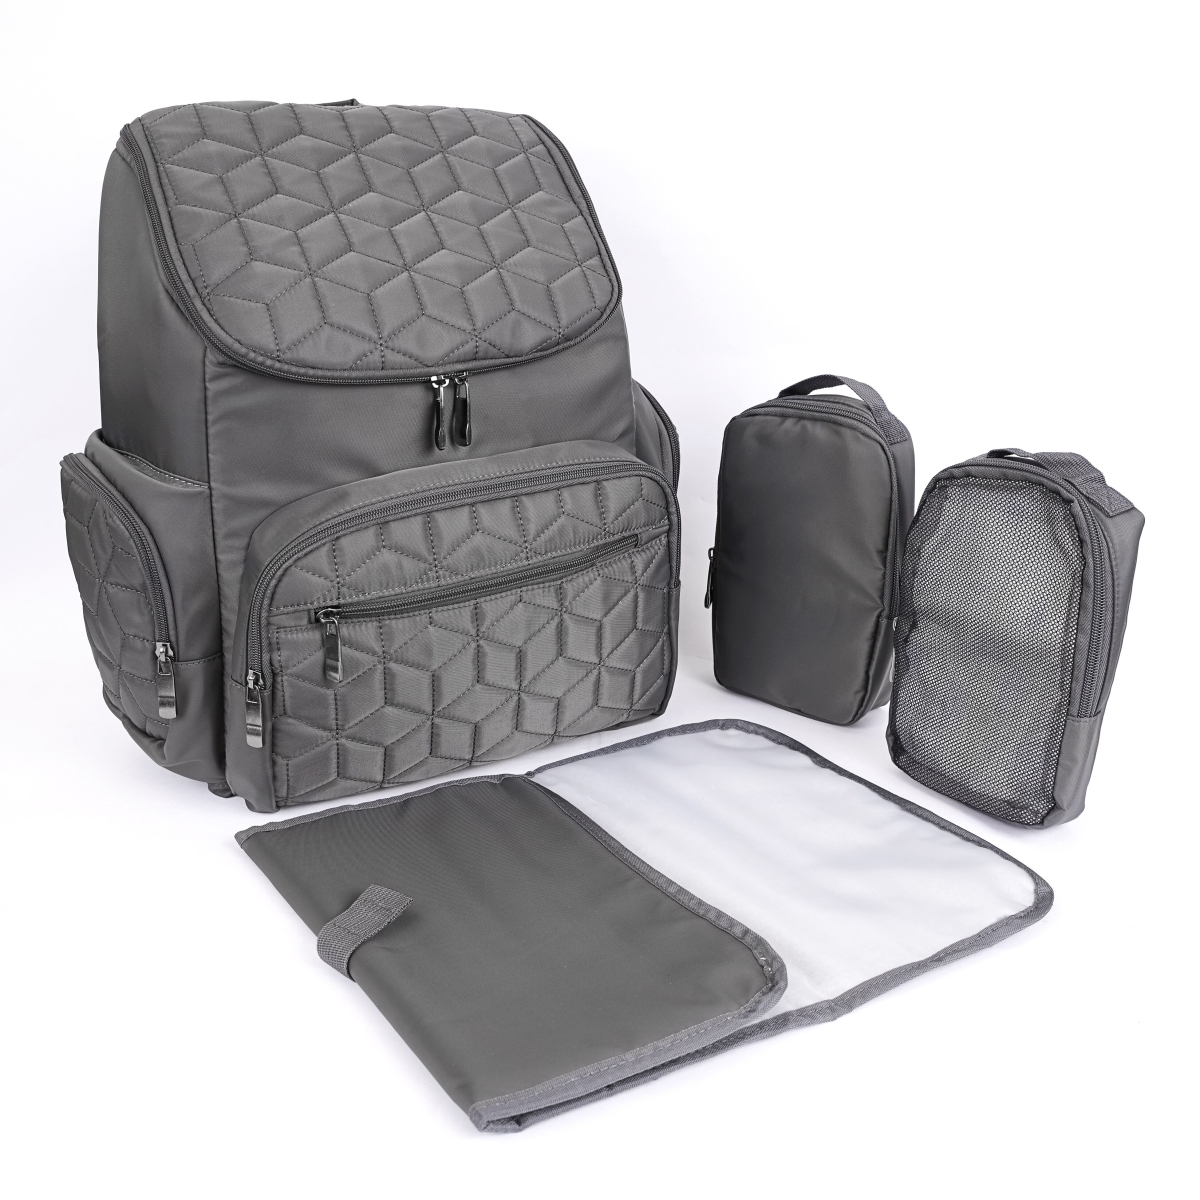 Dp1gy Textured Baby Diaper Bag, Waterproof With Changing Mat, Pockets & Insulated Pouch - Gray